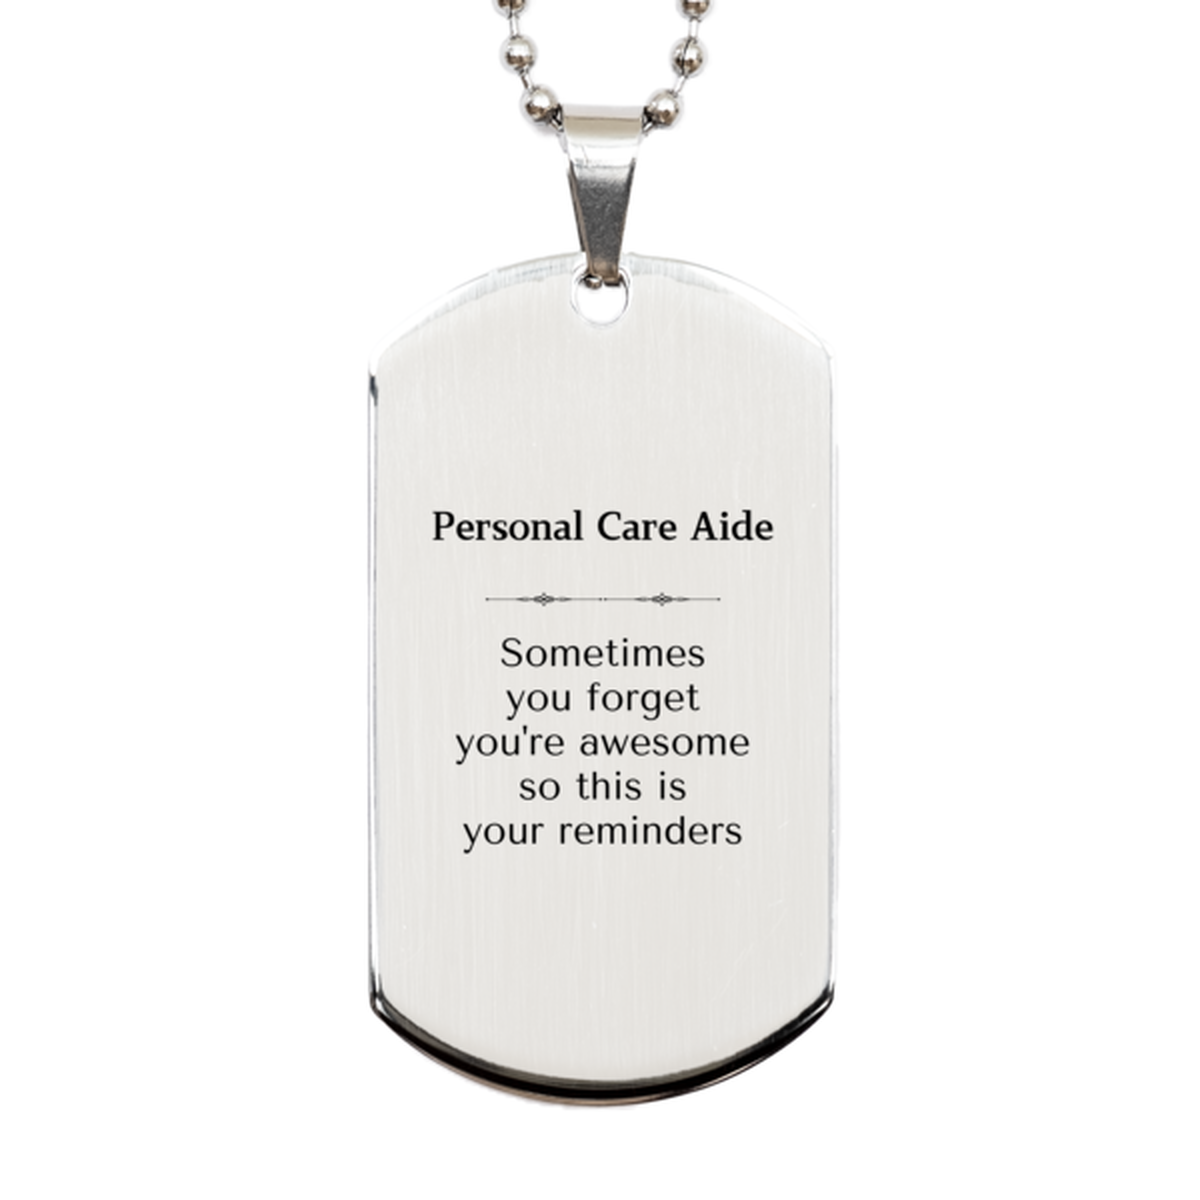 Sentimental Personal Care Aide Silver Dog Tag, Personal Care Aide Sometimes you forget you're awesome so this is your reminders, Graduation Christmas Birthday Gifts for Personal Care Aide, Men, Women, Coworkers